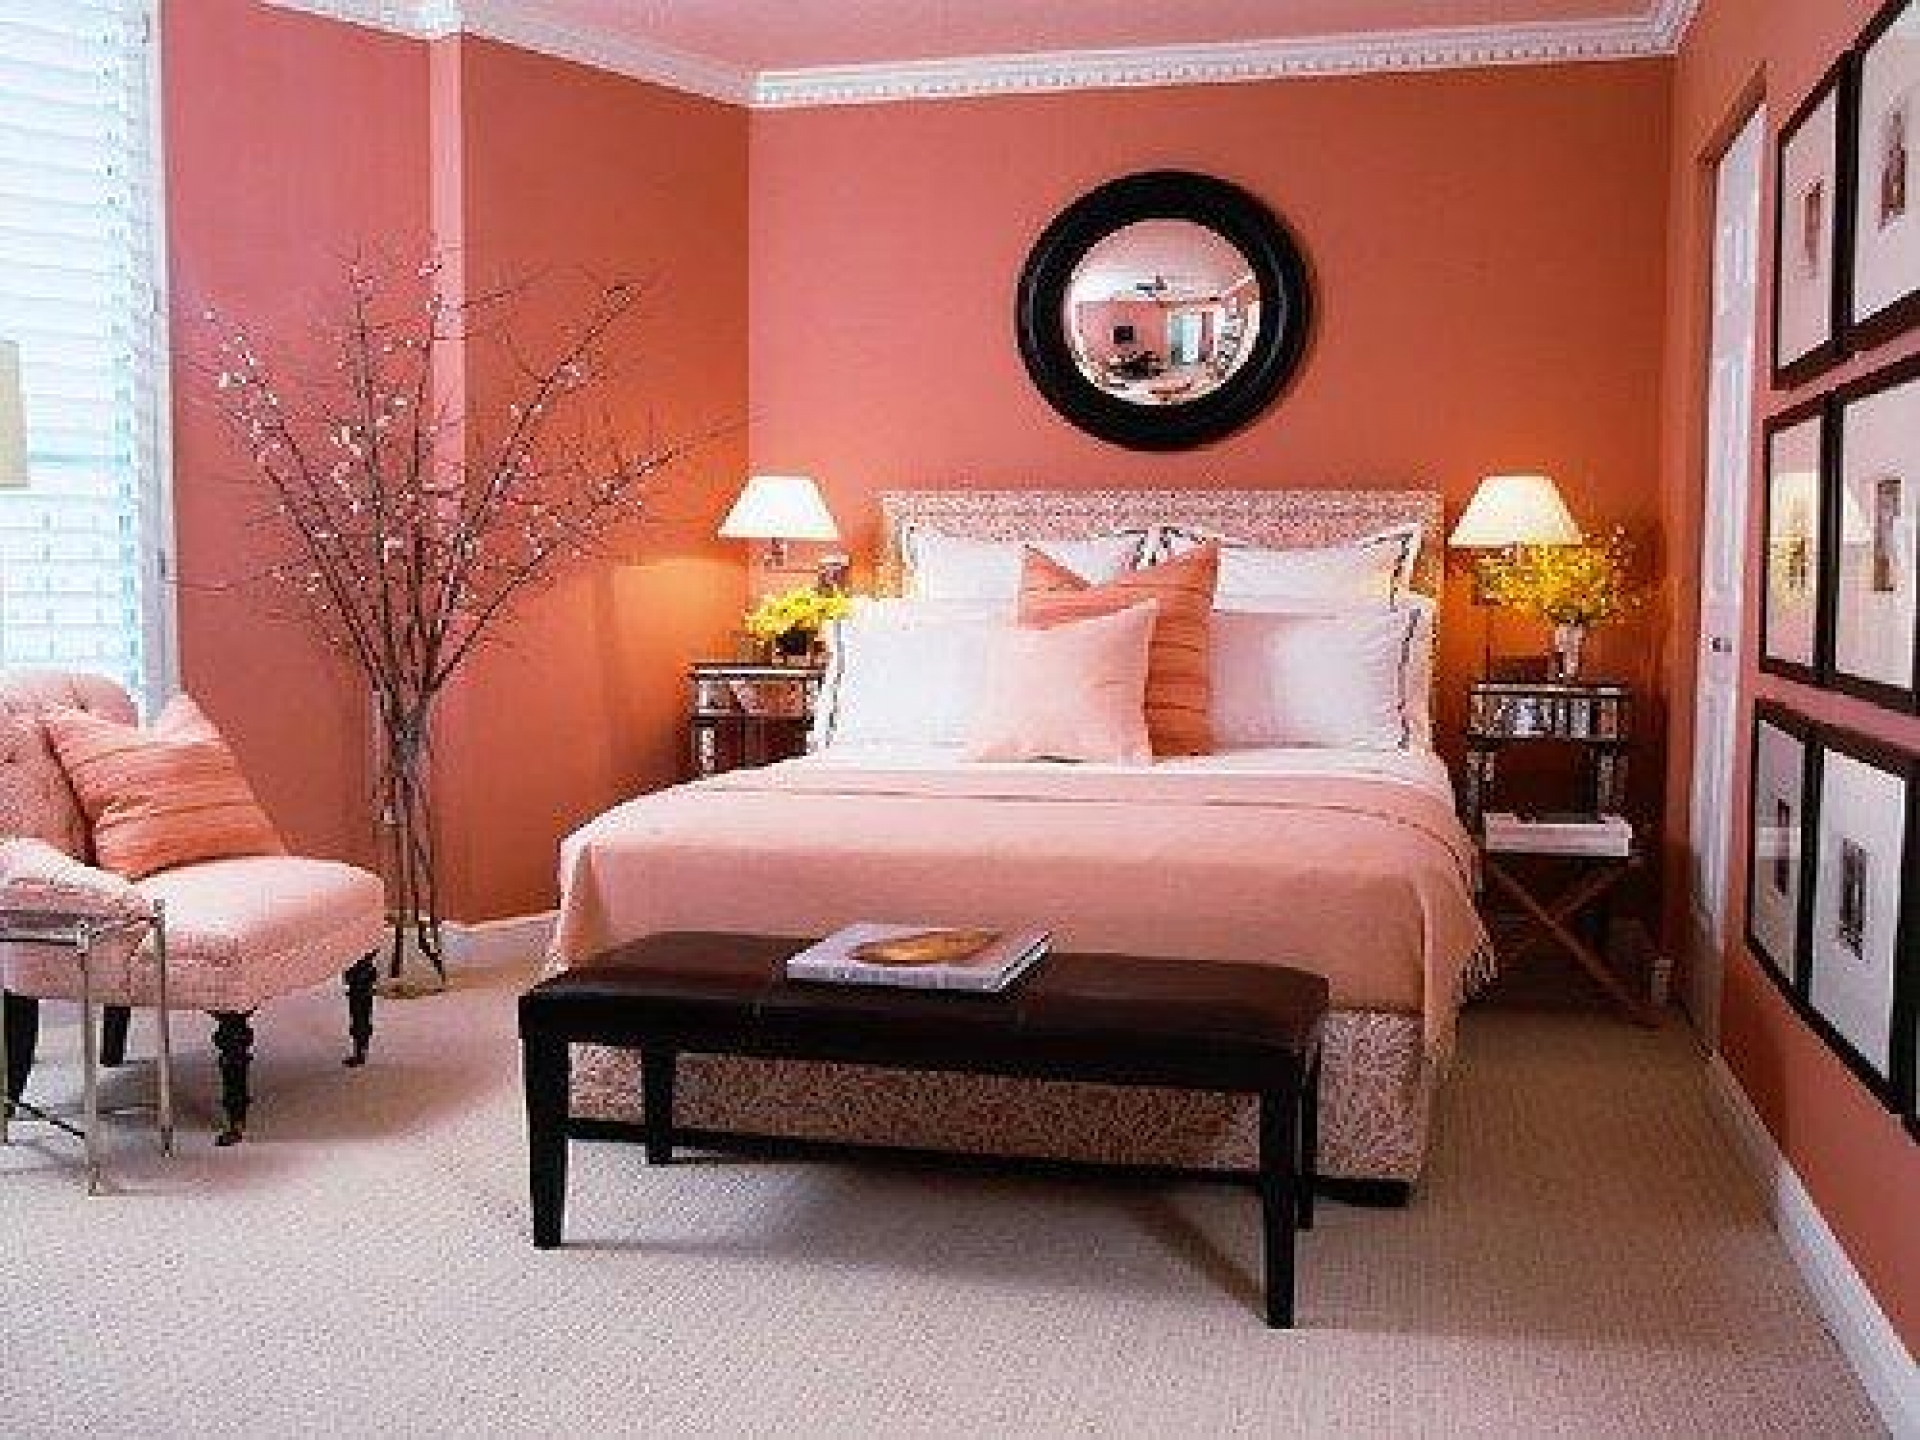 25 Beautiful Bedroom Ideas For Your Home – The WoW Style
